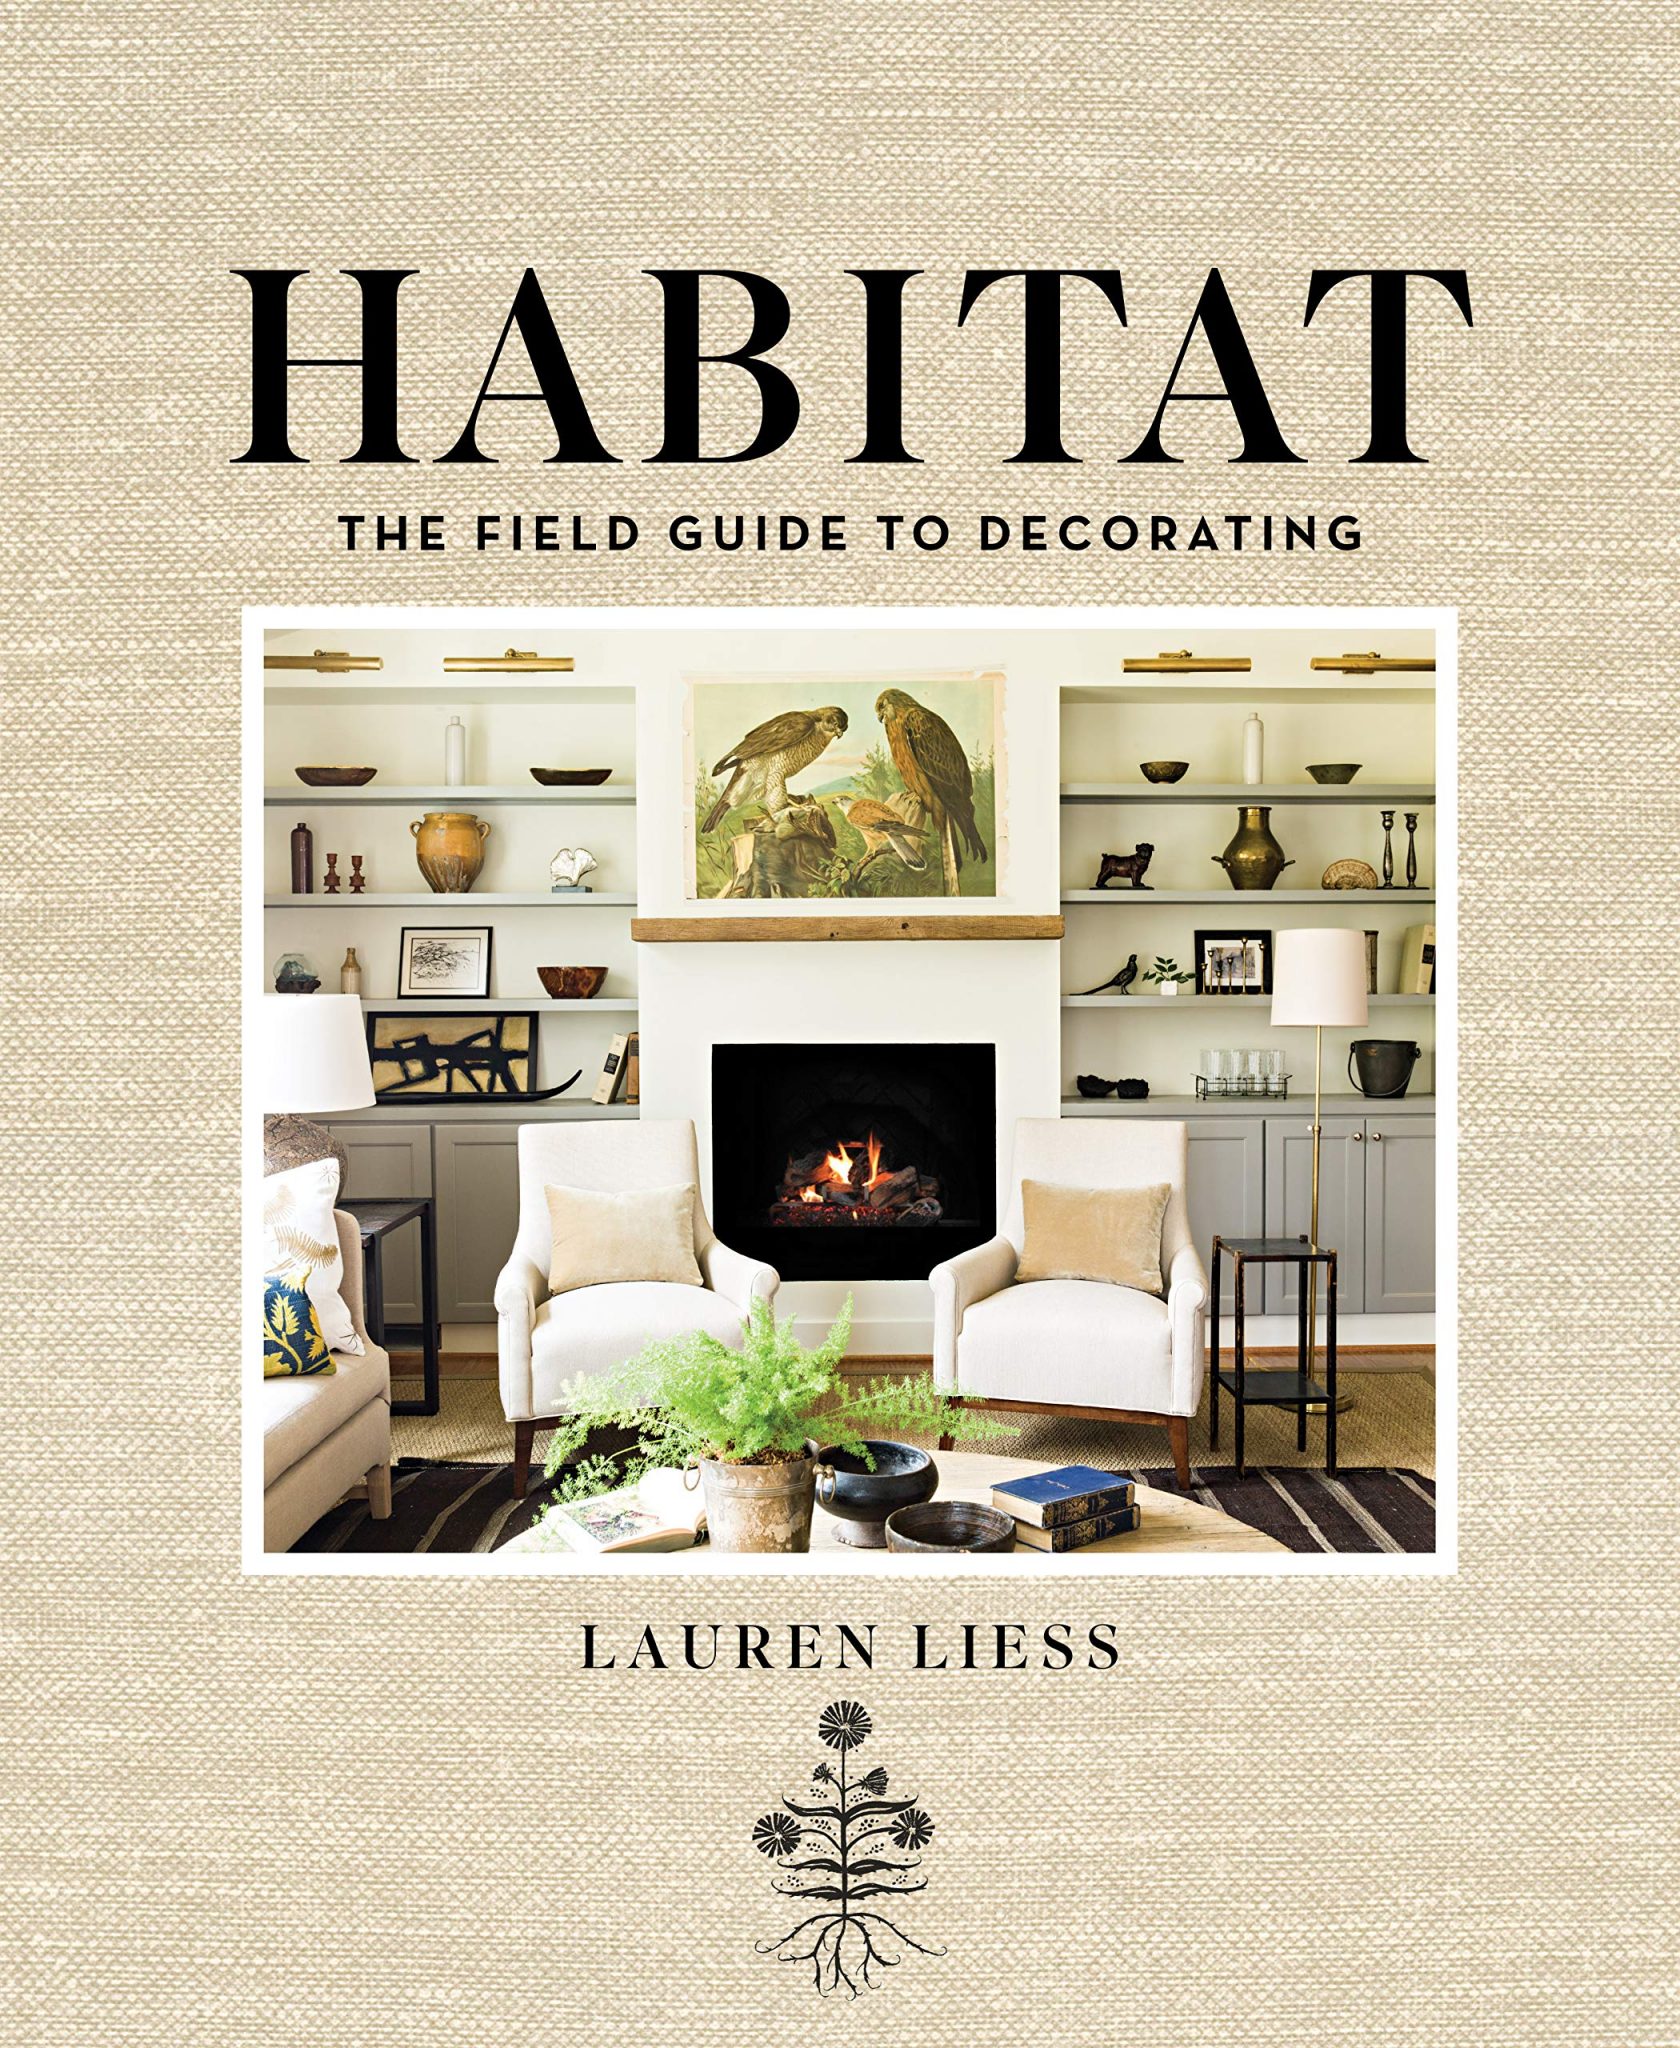 Habitat The Field Guide to Decorating by Lauren Liess